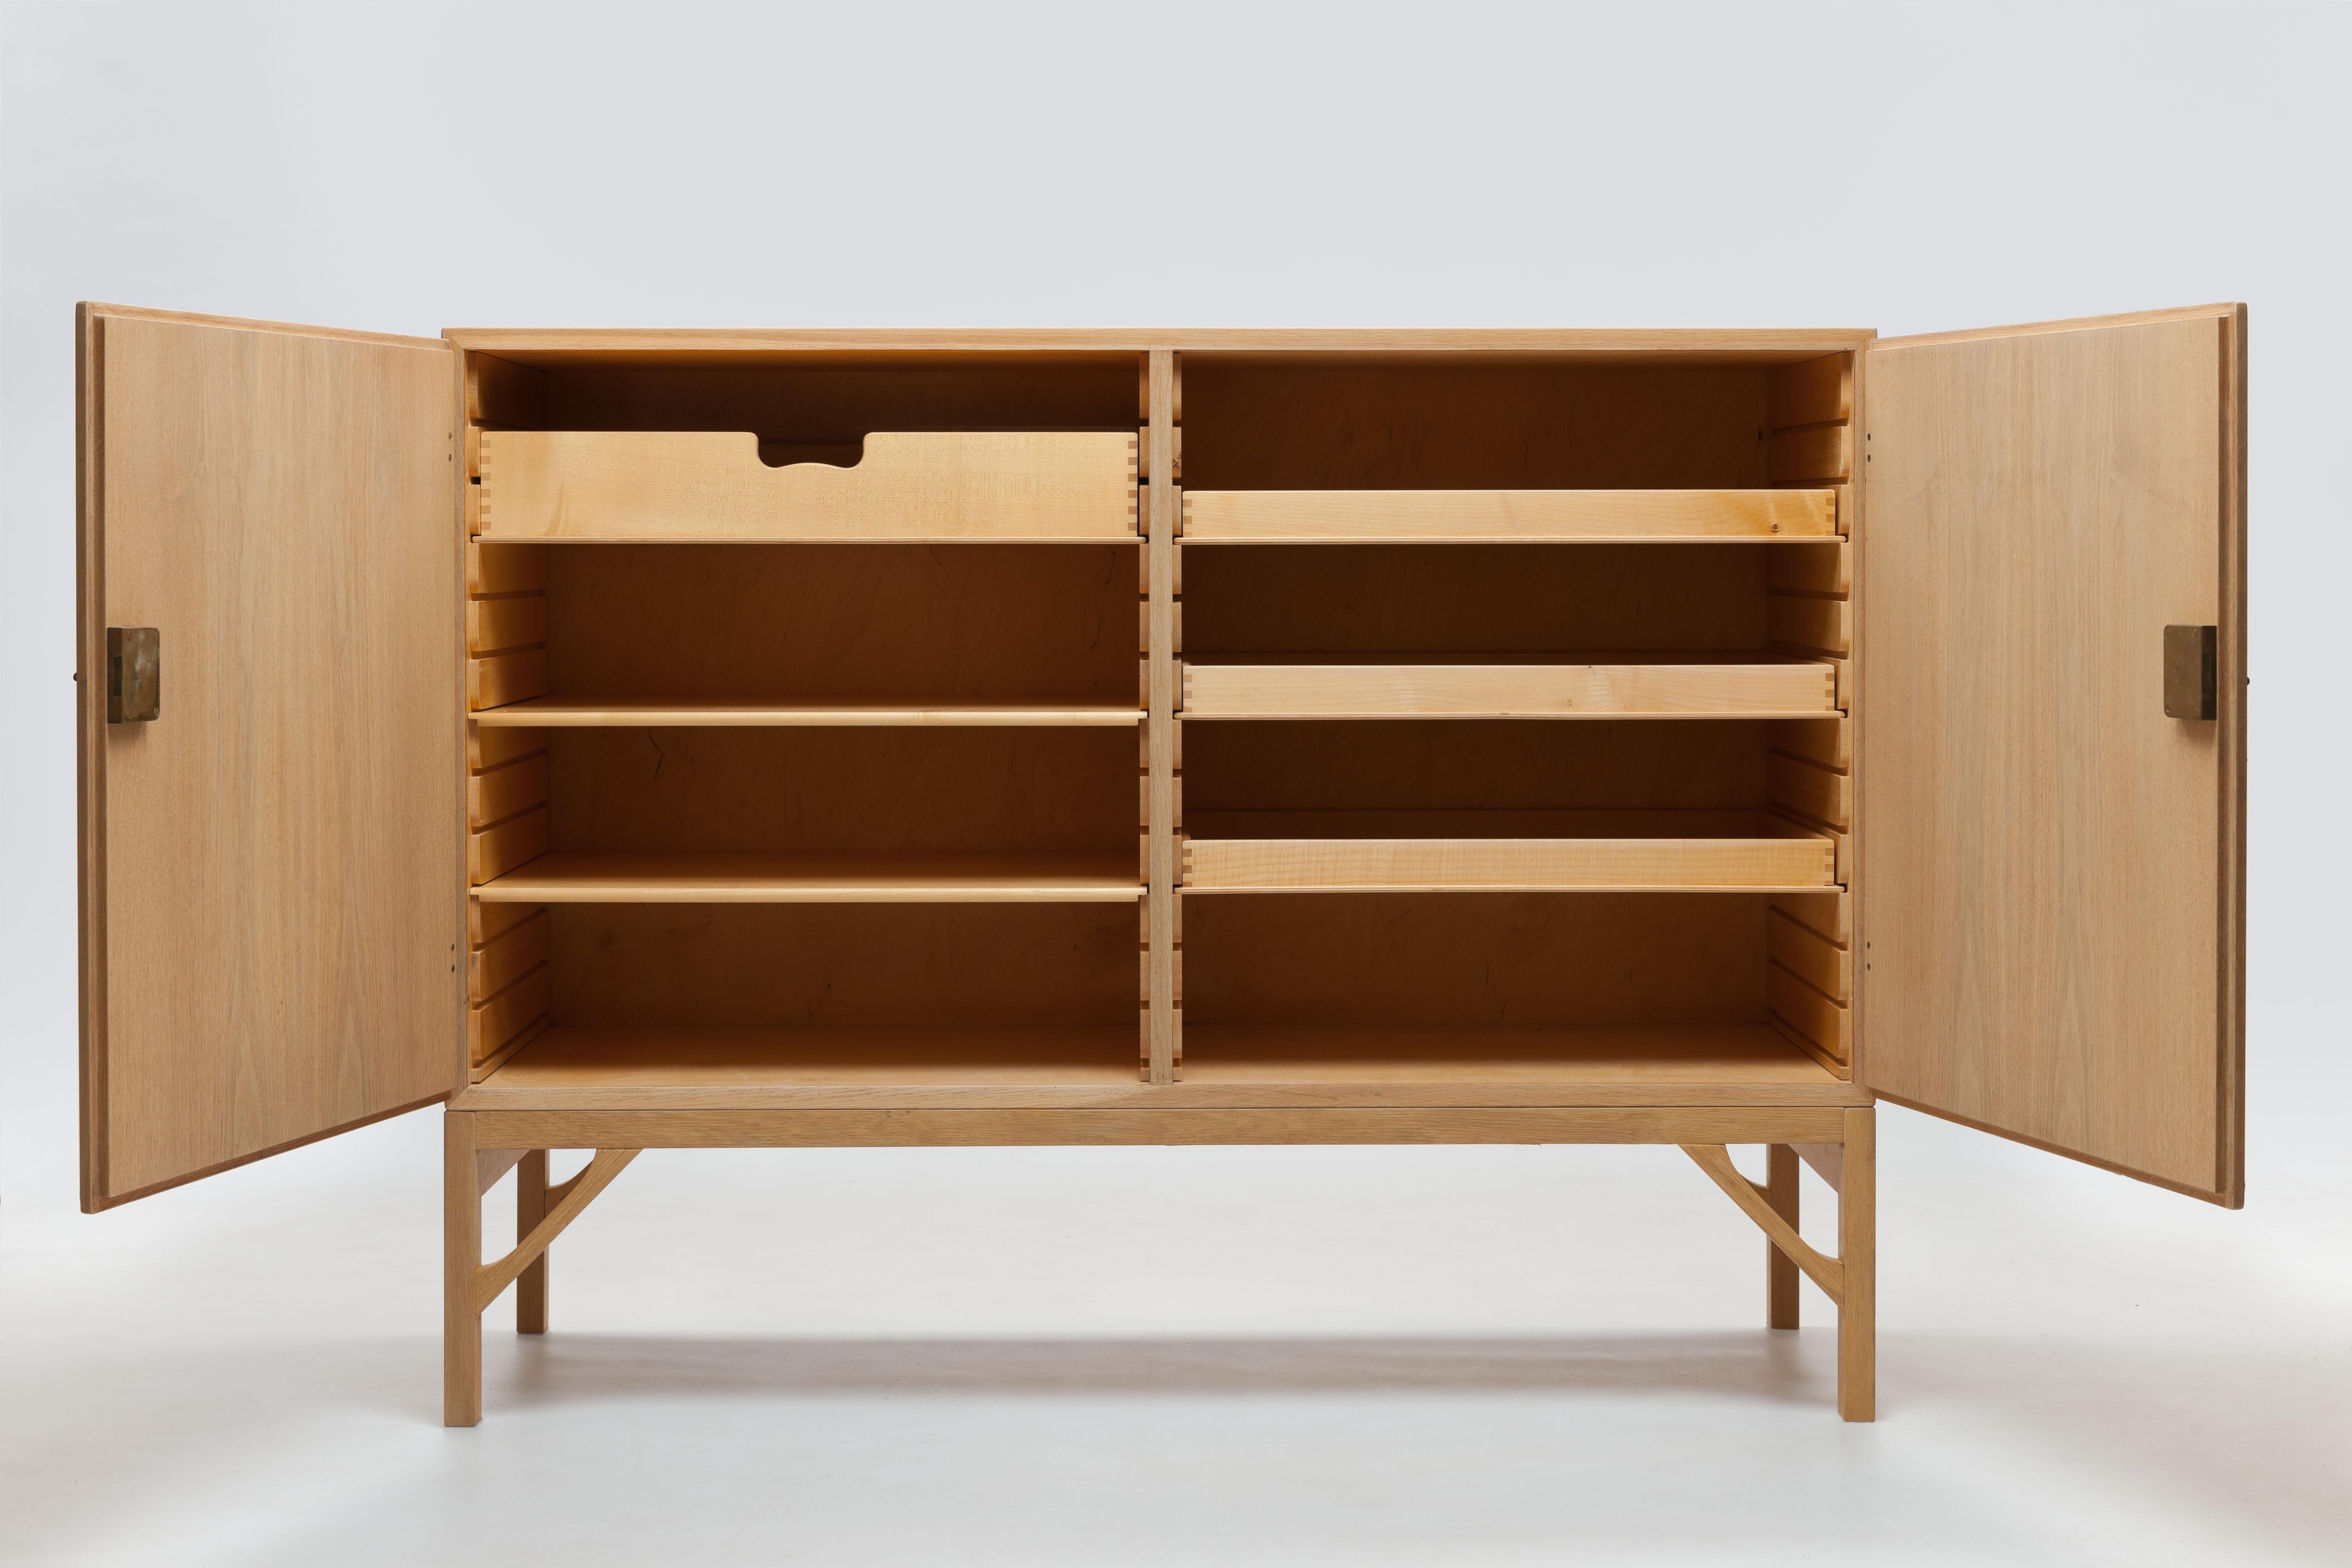 Oak cabinet model A232 designed in 1958 by the Danish designer Borge Mogensen for FDB Møbler, made by CM Madsen, Denmark. 
This clean design is executed in wonderful quality with attention to every detail. The cabinet is finished with solid oak